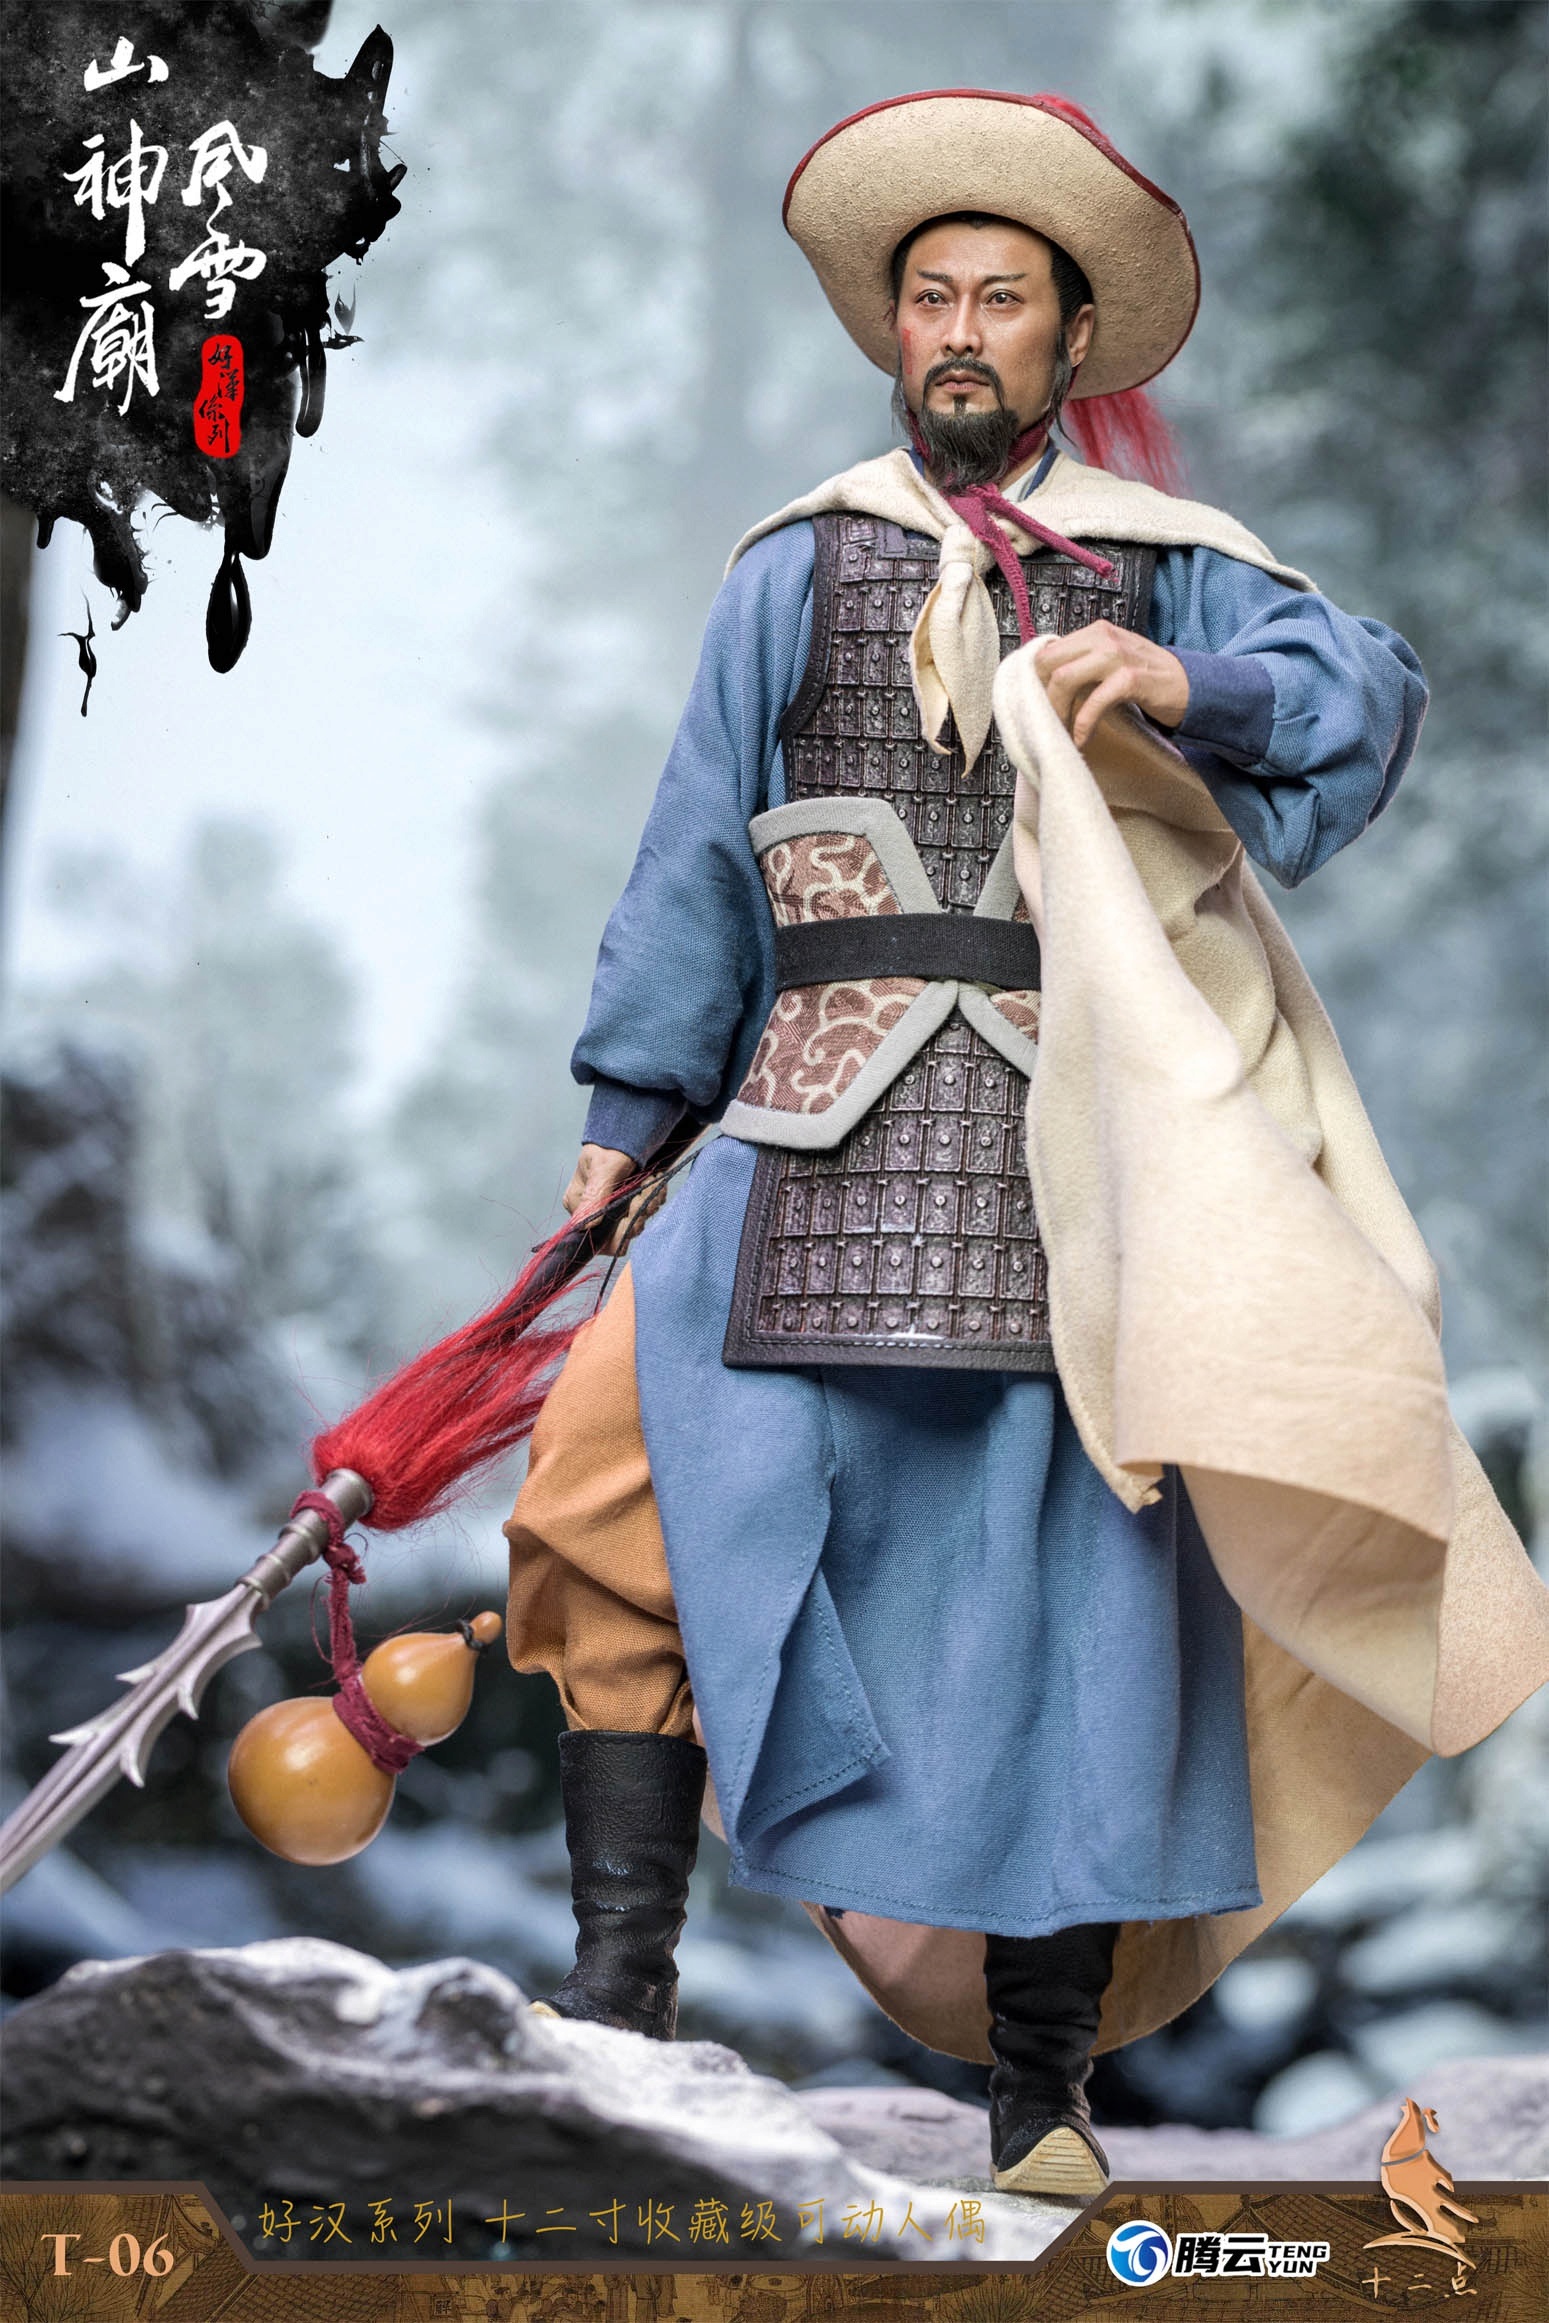 NEW PRODUCT: Twelve - Hero Series - Leopard Head Lin Chong Fengxue Mountain Temple Action Figure (T-05 /T-06) 3221